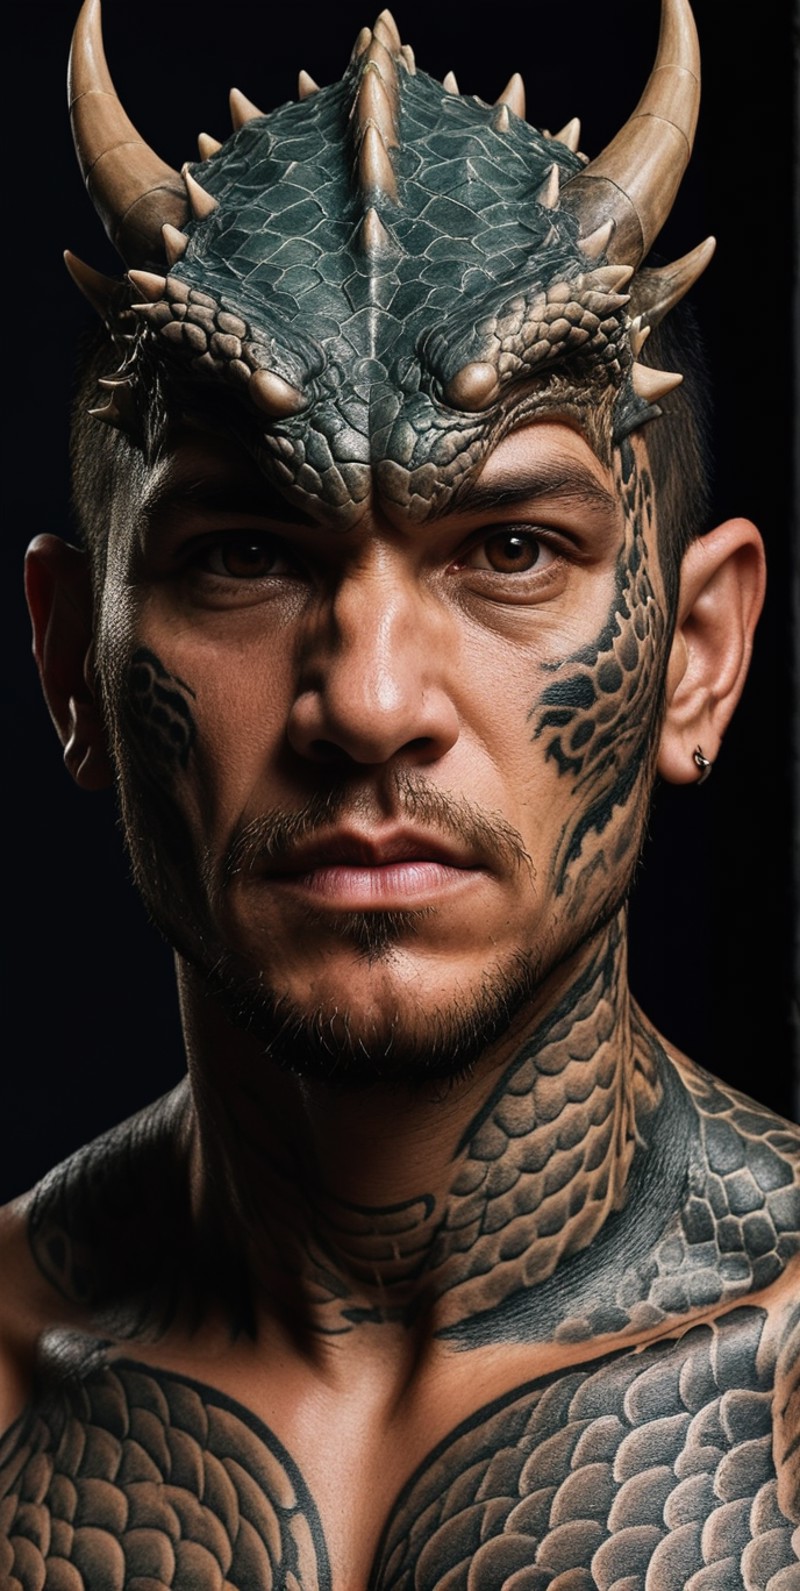 A man wearing a full - body tattoo of a dragon, the tattoo meets the man's face and blends into a scaly draconic visage co...